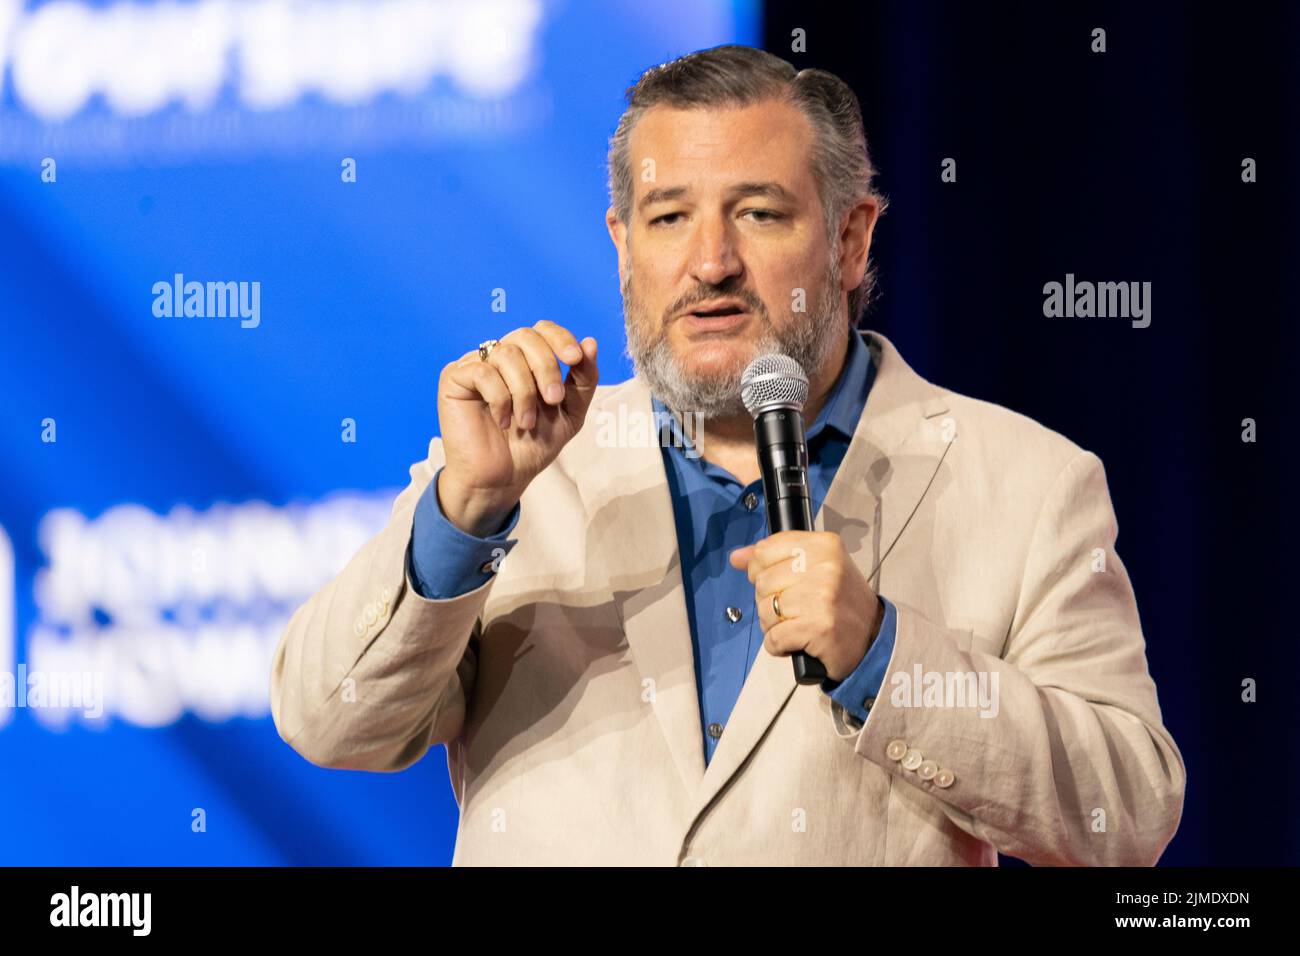 Dallas, TX - August 5, 2022: Senator Ted Cruz speaks during CPAC Texas 2022 conference at Hilton Anatole Stock Photo